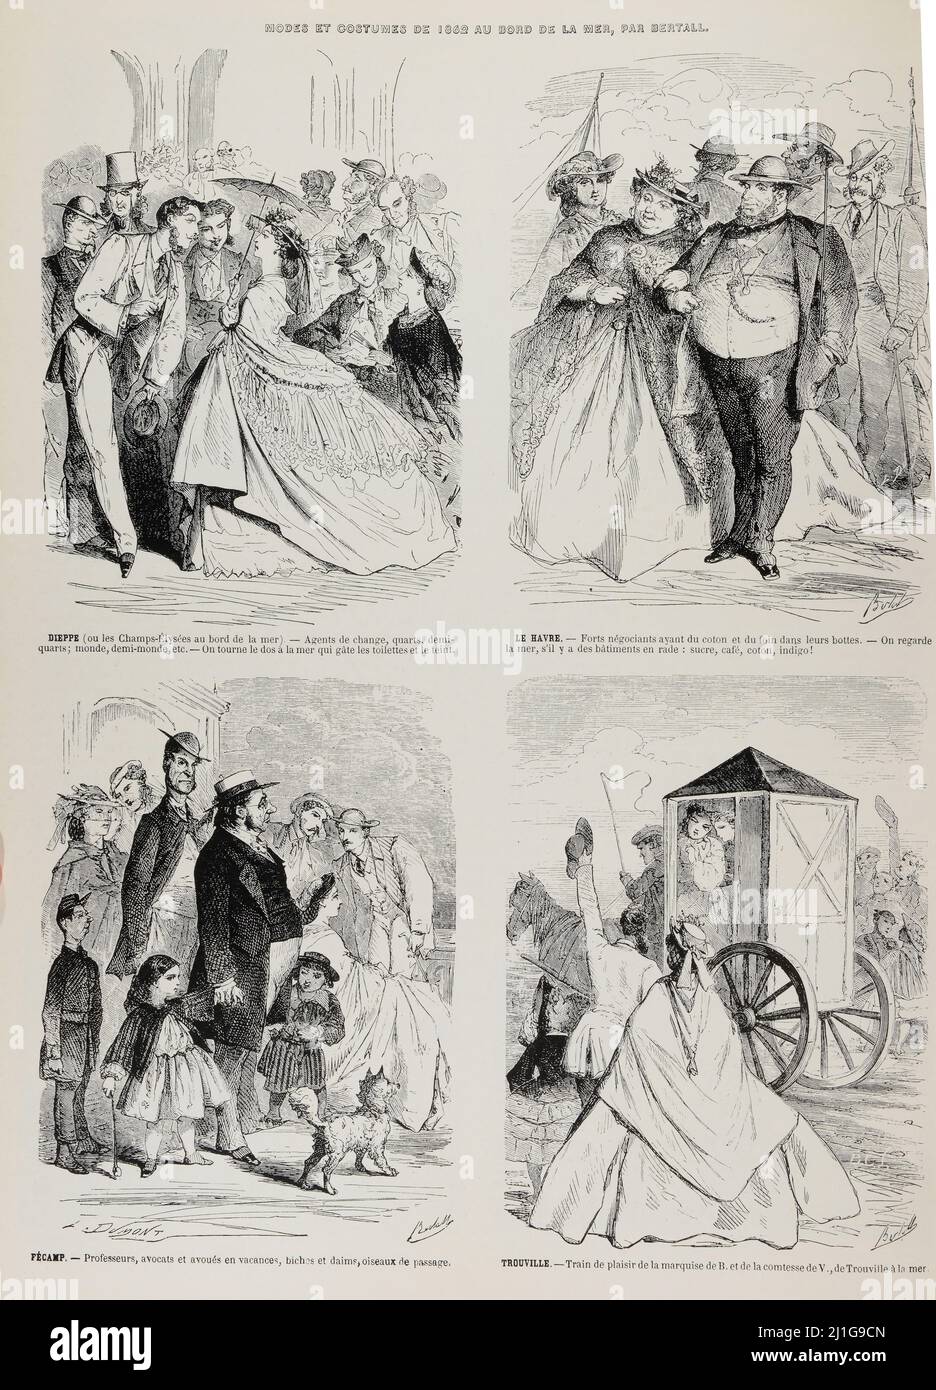 Mode et costumes de 1862 au bord de la mer - (eng trad : Fashion and  costumes of 1862 by the sea ) - Extract from "L'Illustration Journal  Universel" - French illustrated magazine - 1862 Stock Photo - Alamy